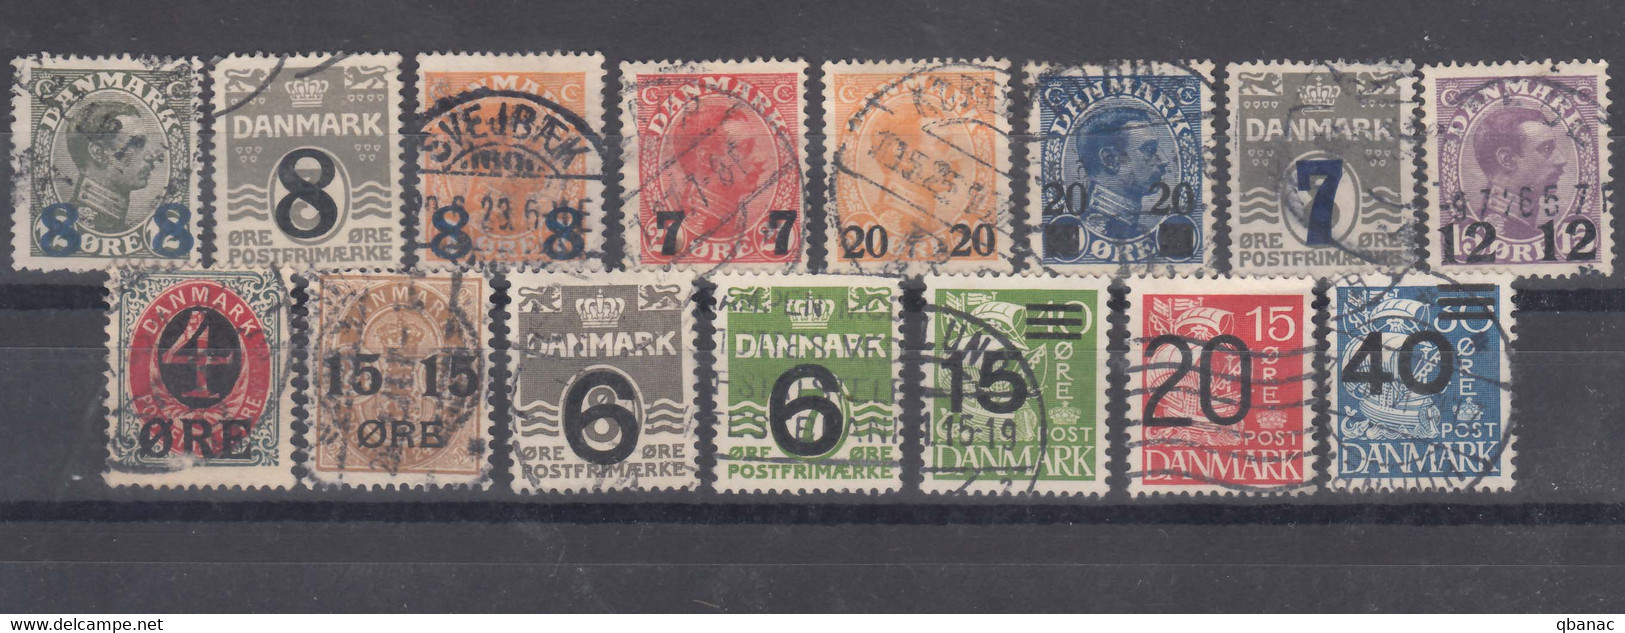 Denmark Overprint Stamps From Different Years, 1904,1921,1926,1940 Used - Gebraucht